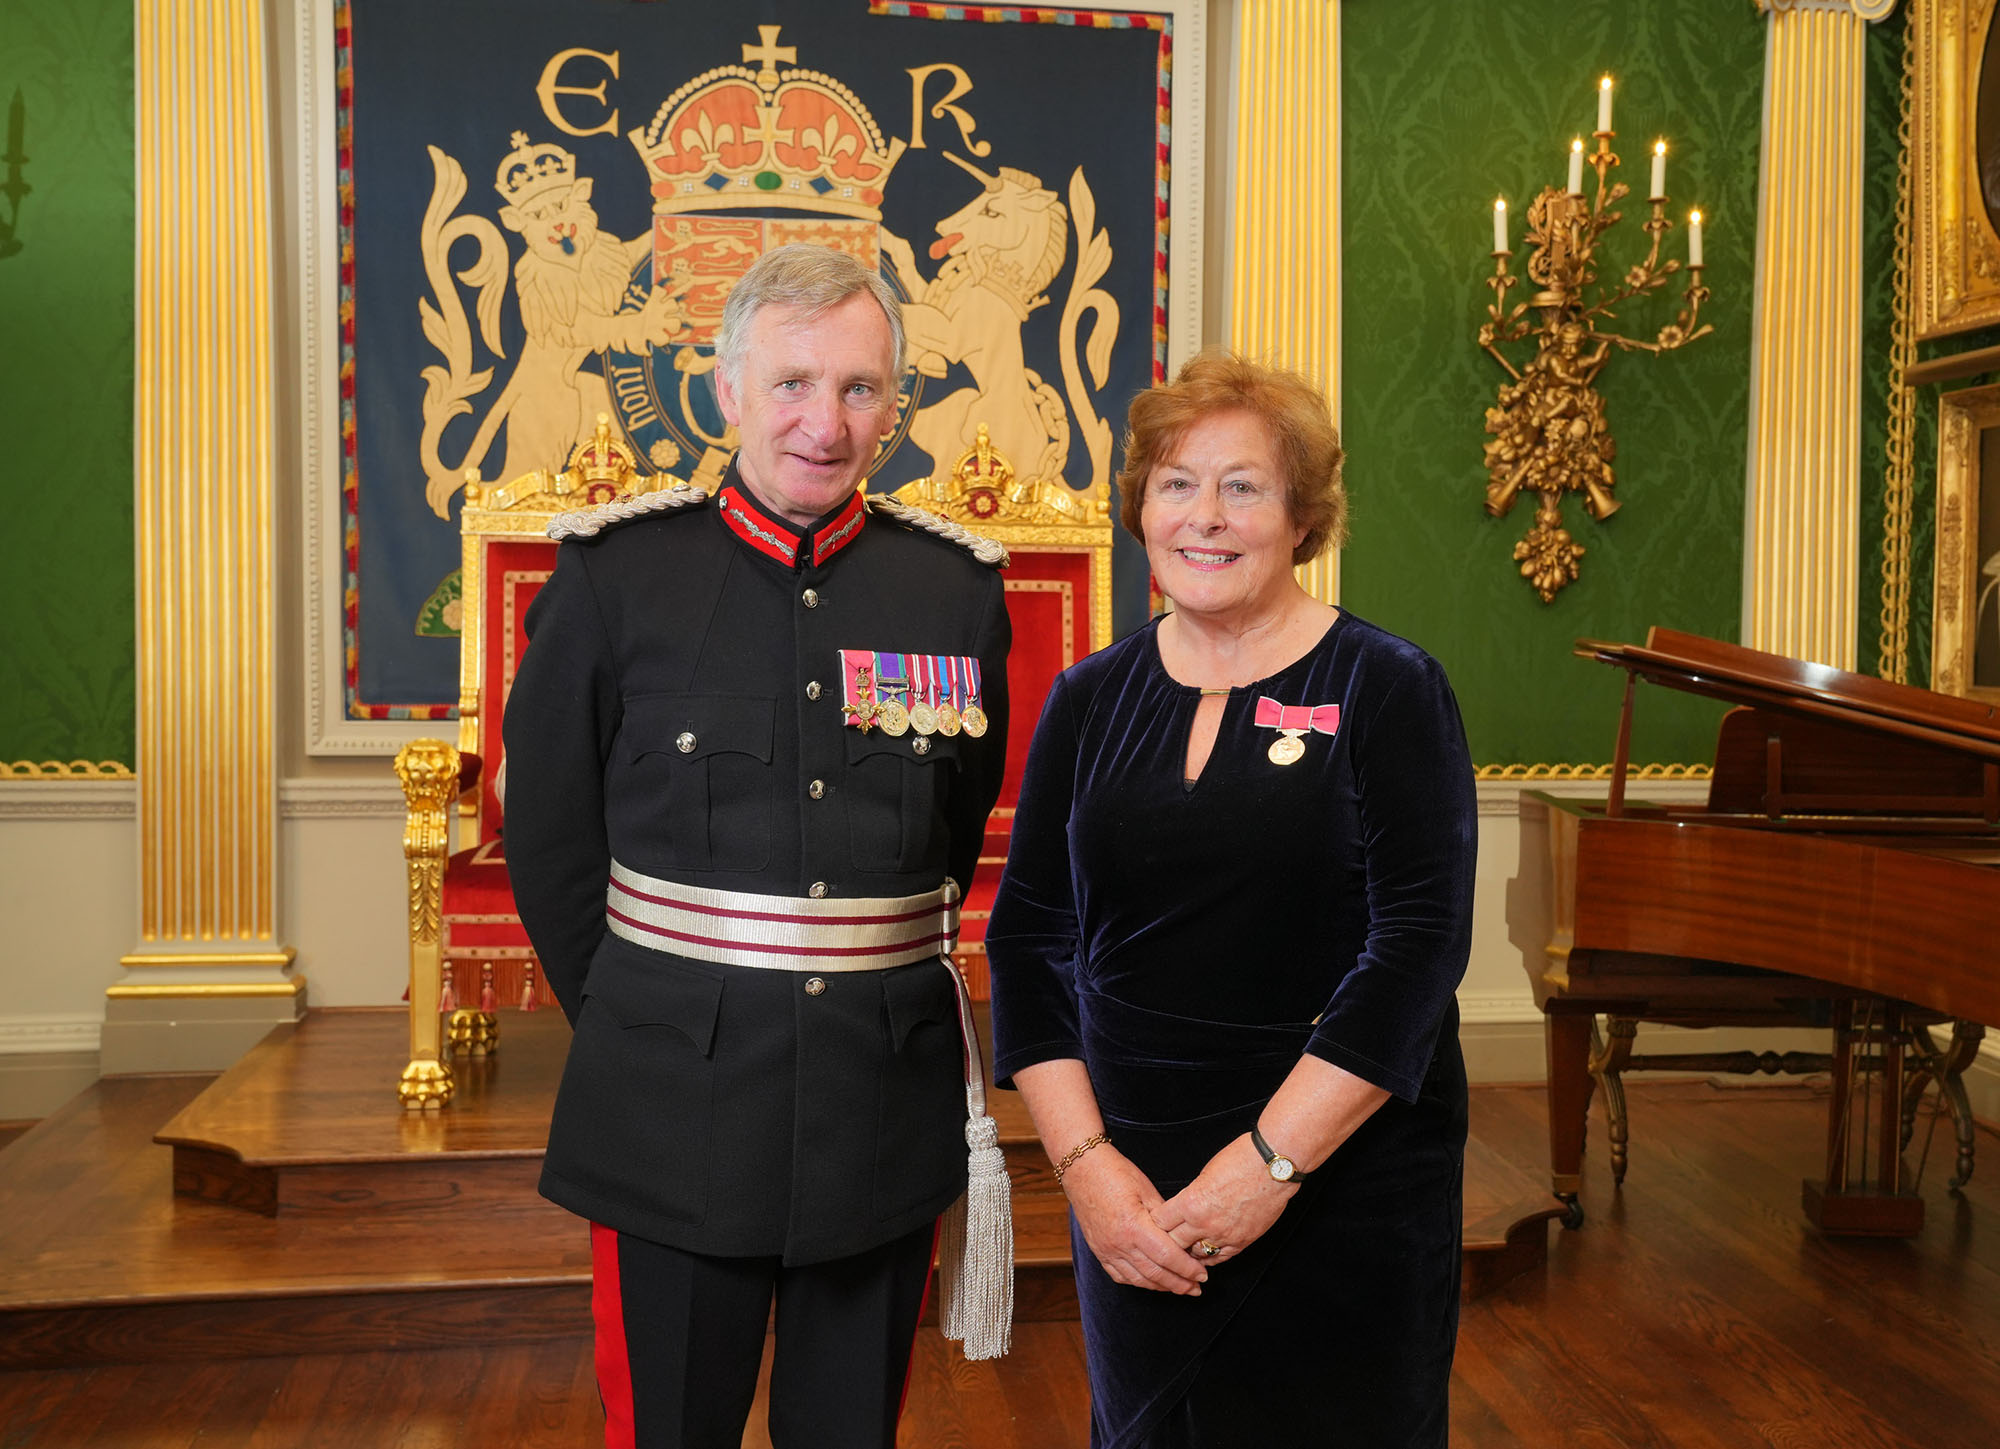 Mrs Joan Bruton BEM pictured receiving her award from Mr Robert Lowry Scott, His Majesty's Lord Lieutenant for Co. Tyrone, during a ceremony at Hillsborough Castle earlier this month.  Photo by Aaron McCracken.